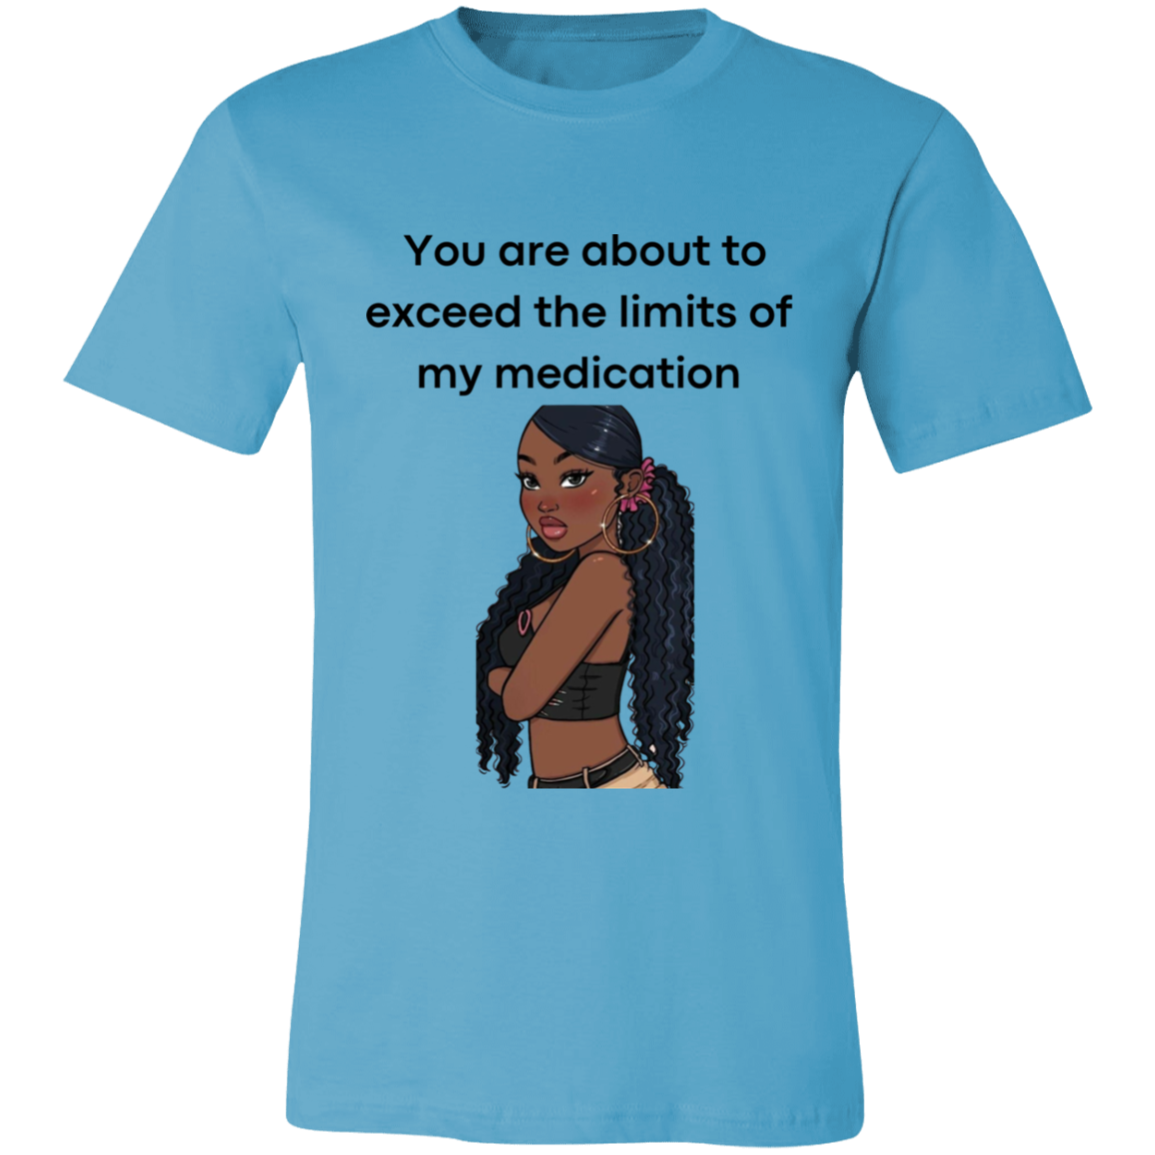 You Are About to Exceed the Limits of My Medication Ladies' Jersey Short-Sleeve T-Shirt